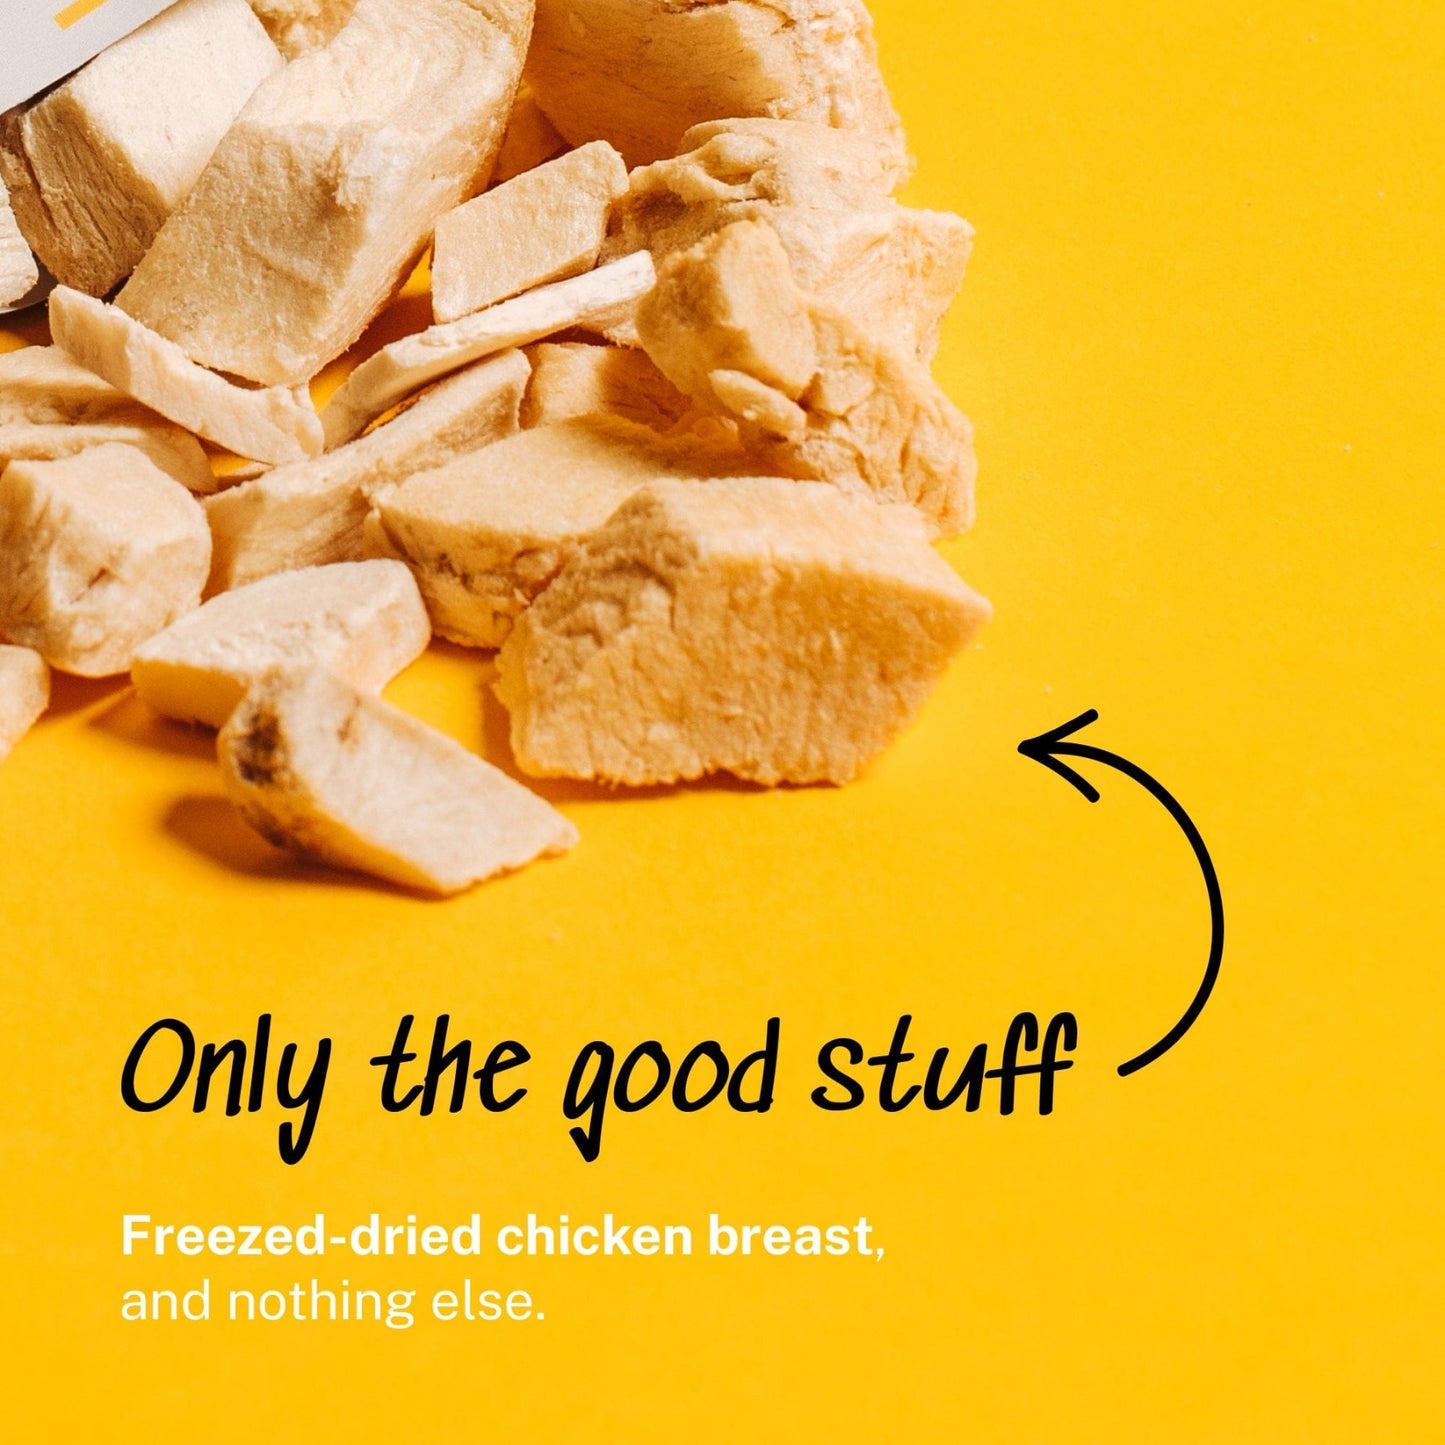 Only the good stuff - freeze-dried chicken breast and nothing else